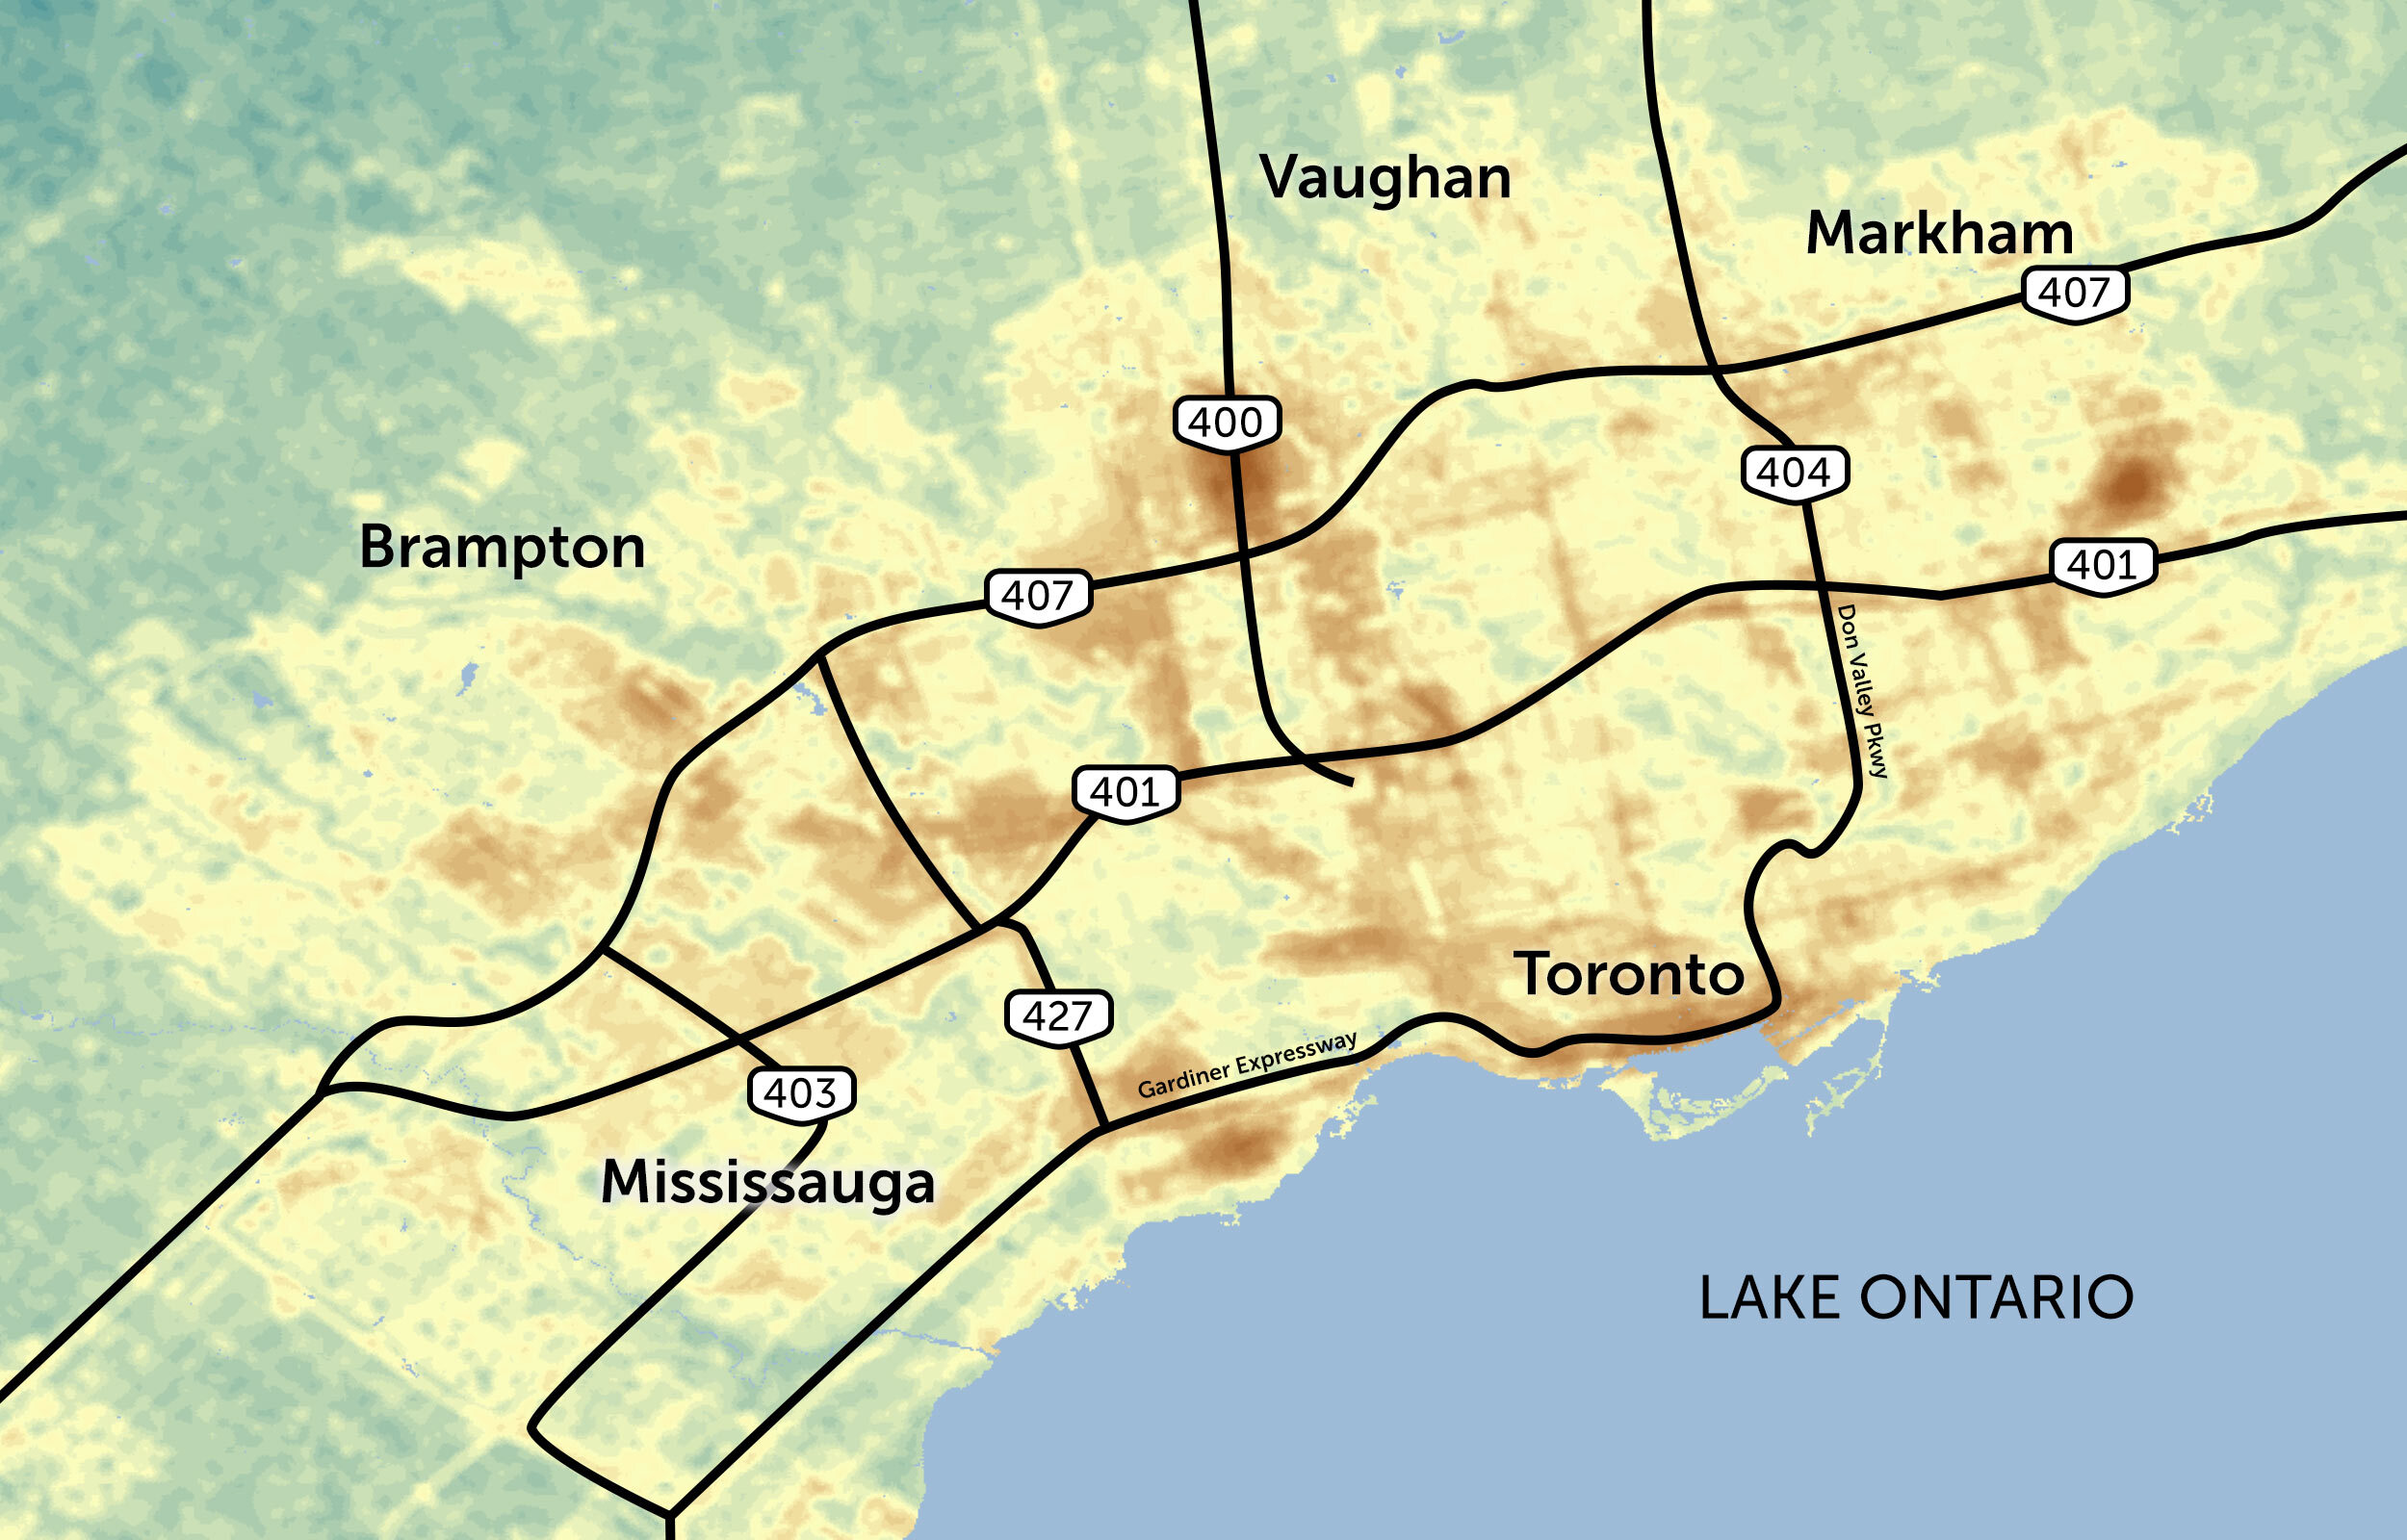 A map showing the location of highways, and patterns of air pollution around the highways